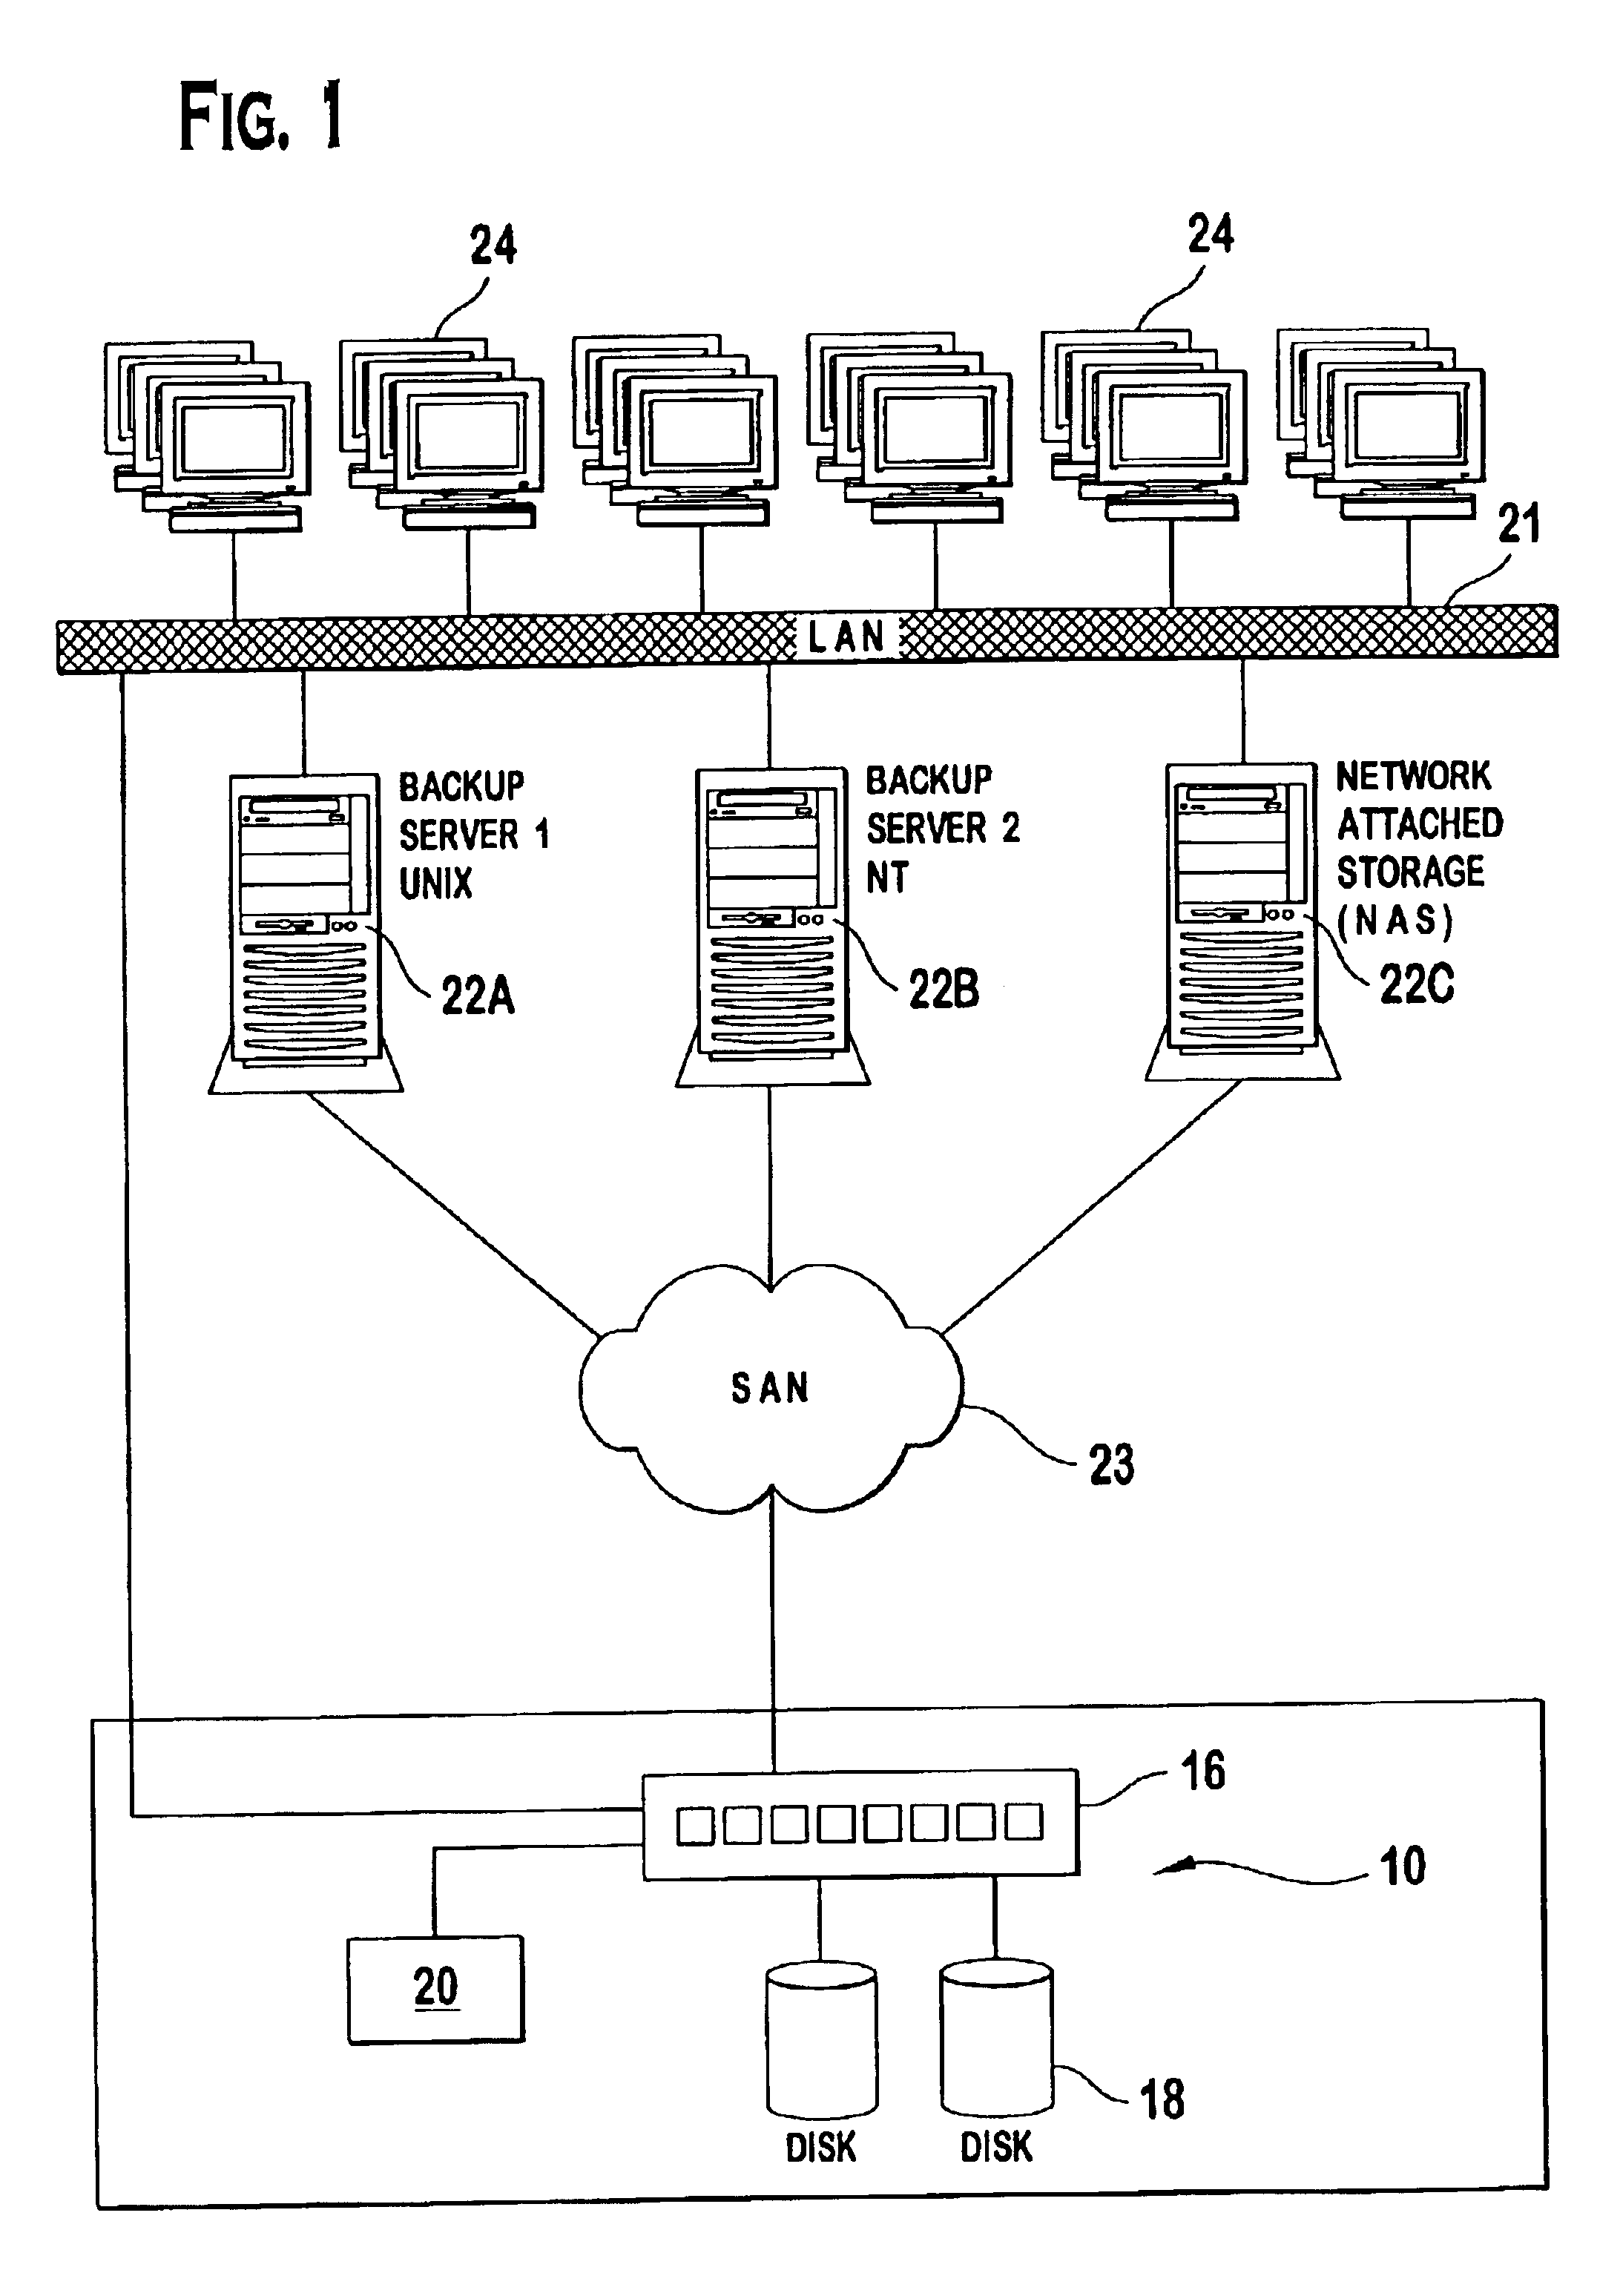 Method of importing data from a physical data storage device into a virtual tape library